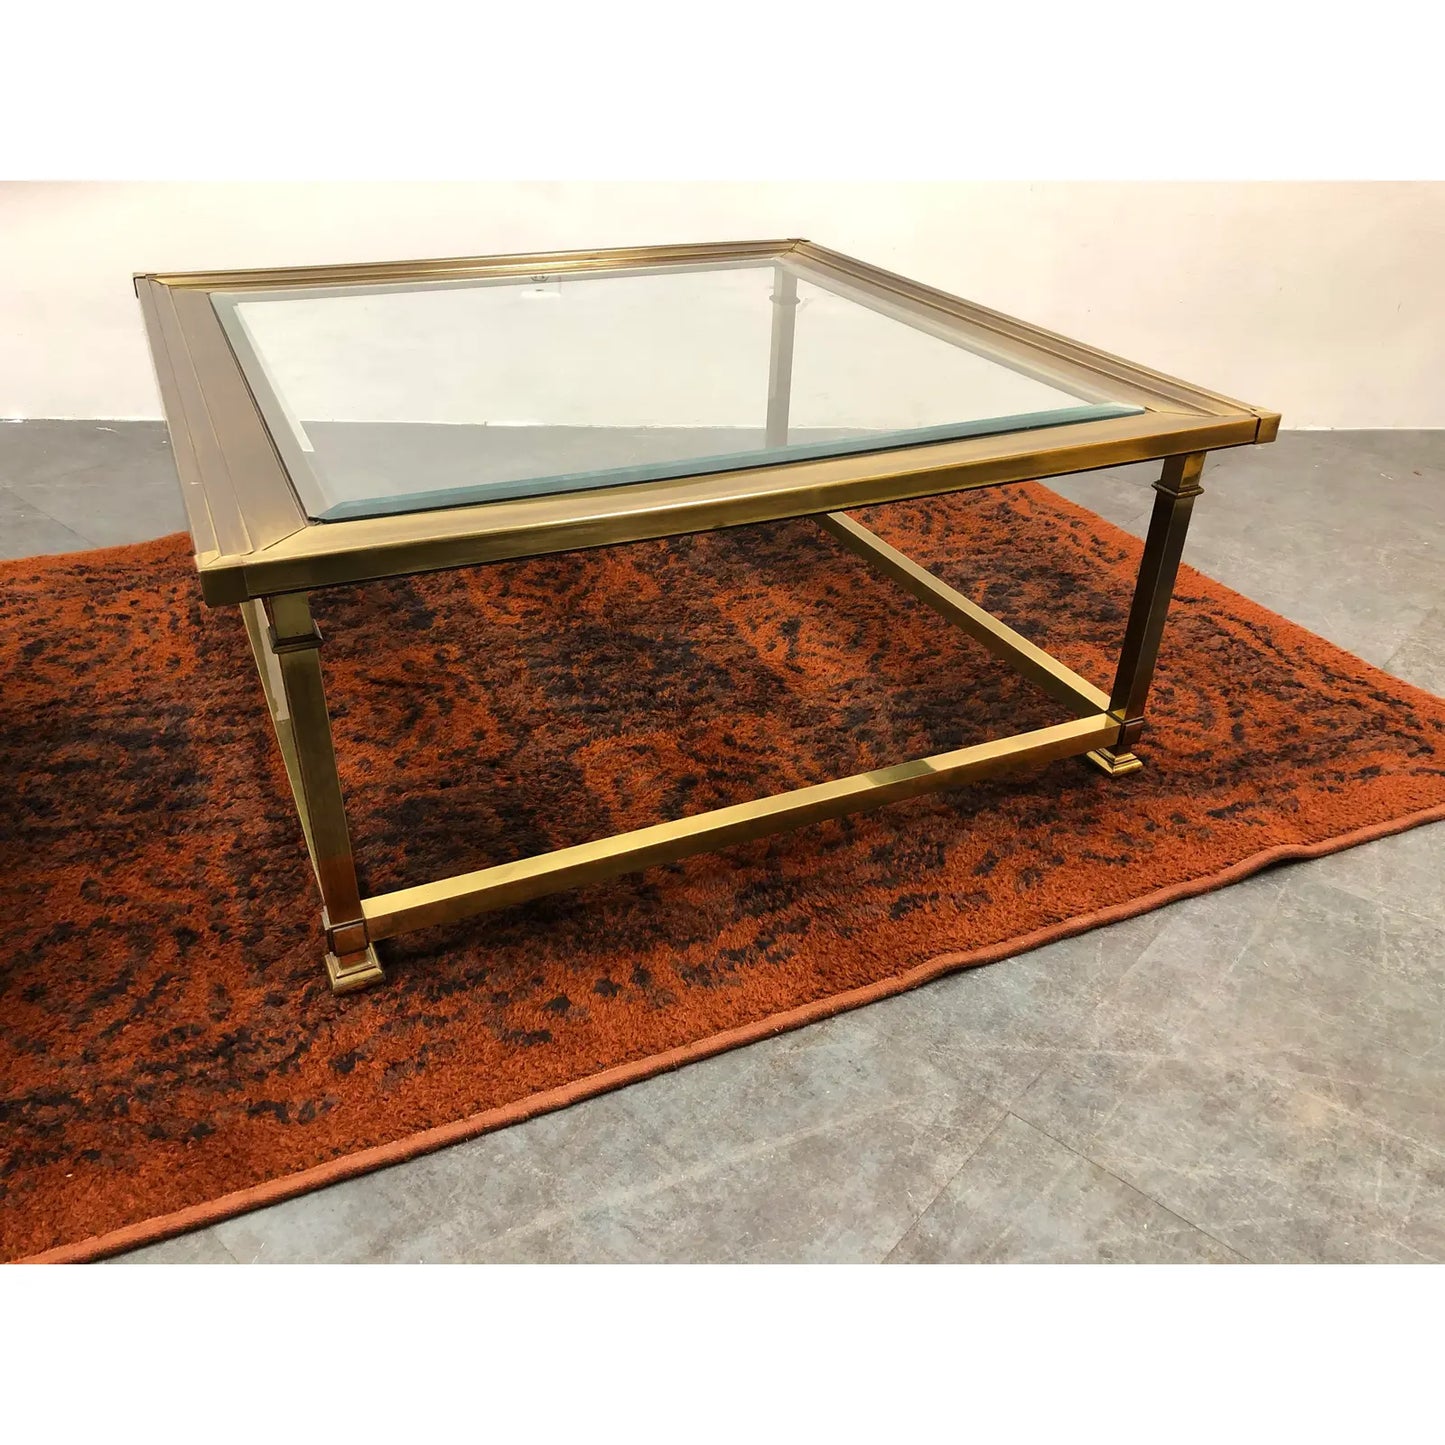 1960S BRASS COFFEE TABLE BY MASTERCRAFT